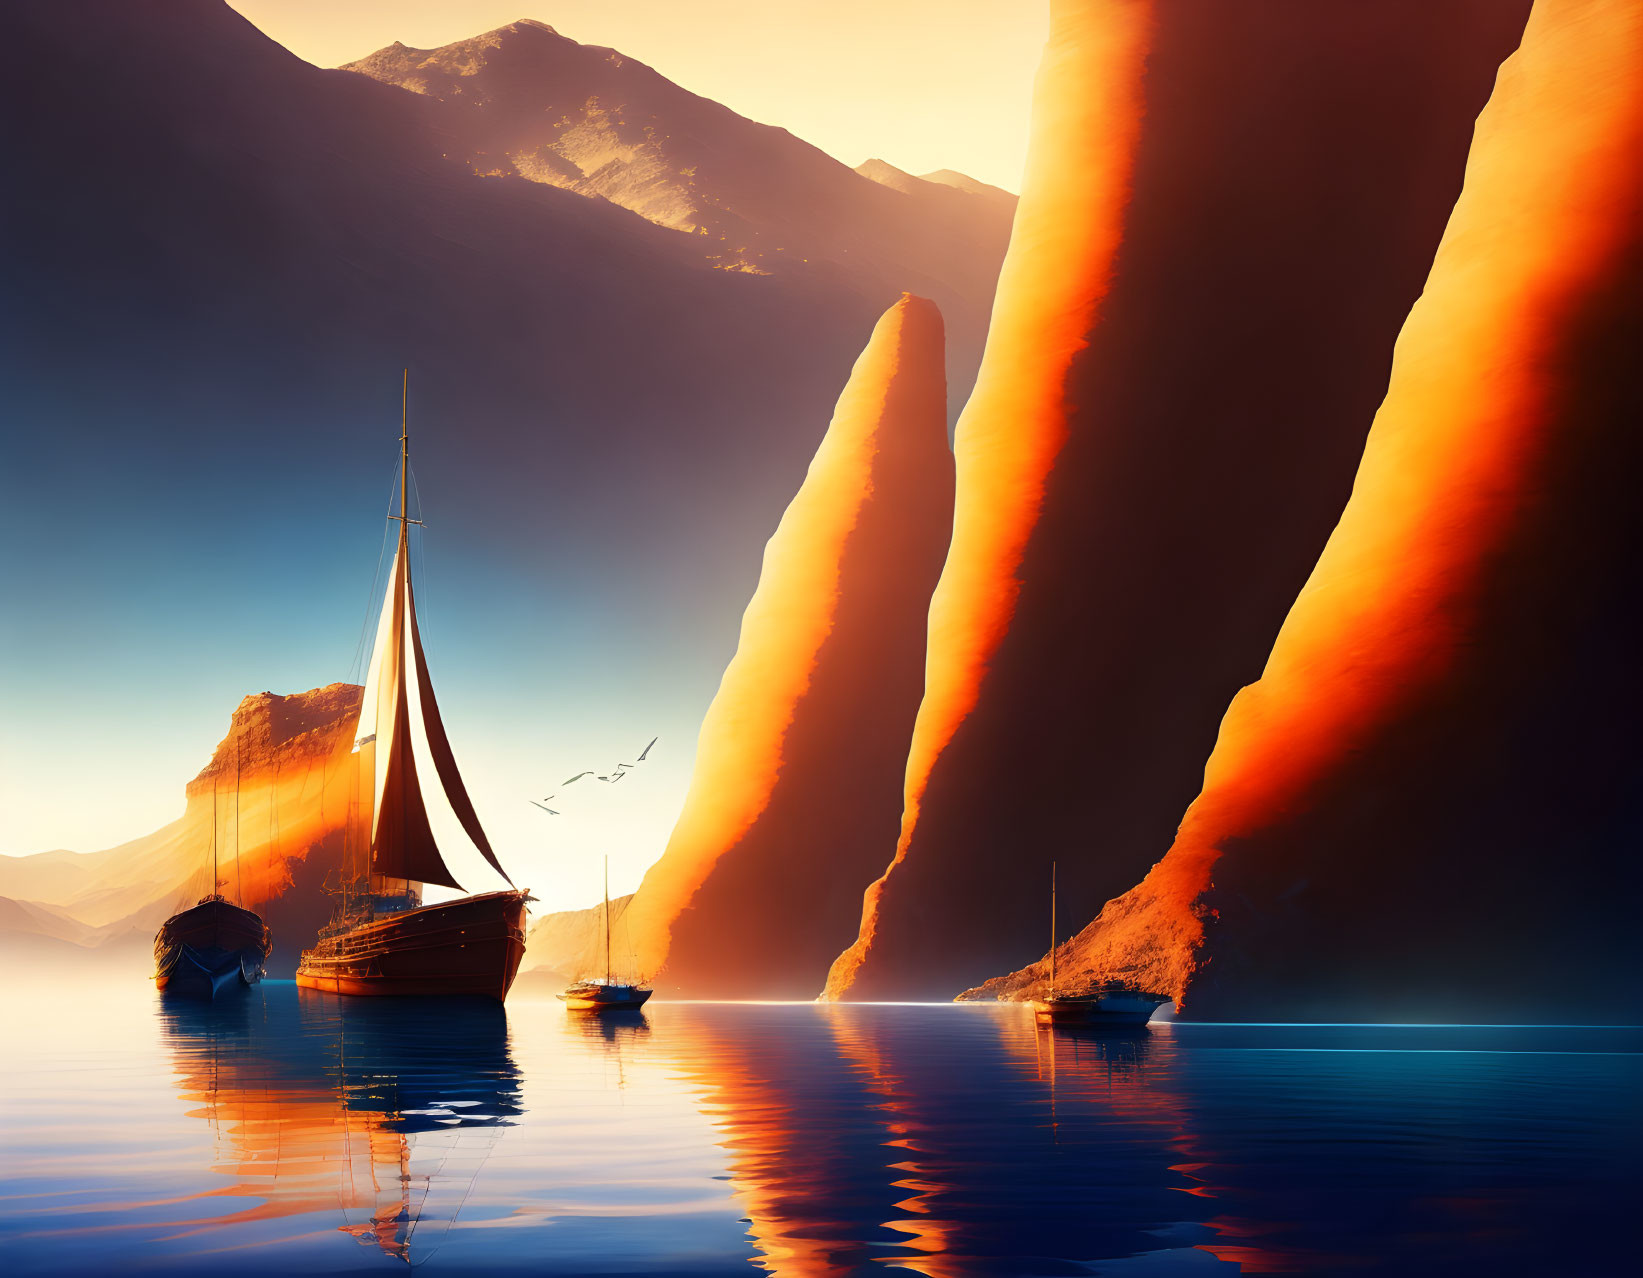 Tranquil sailboat scene with red cliffs, birds, and glowing sunset